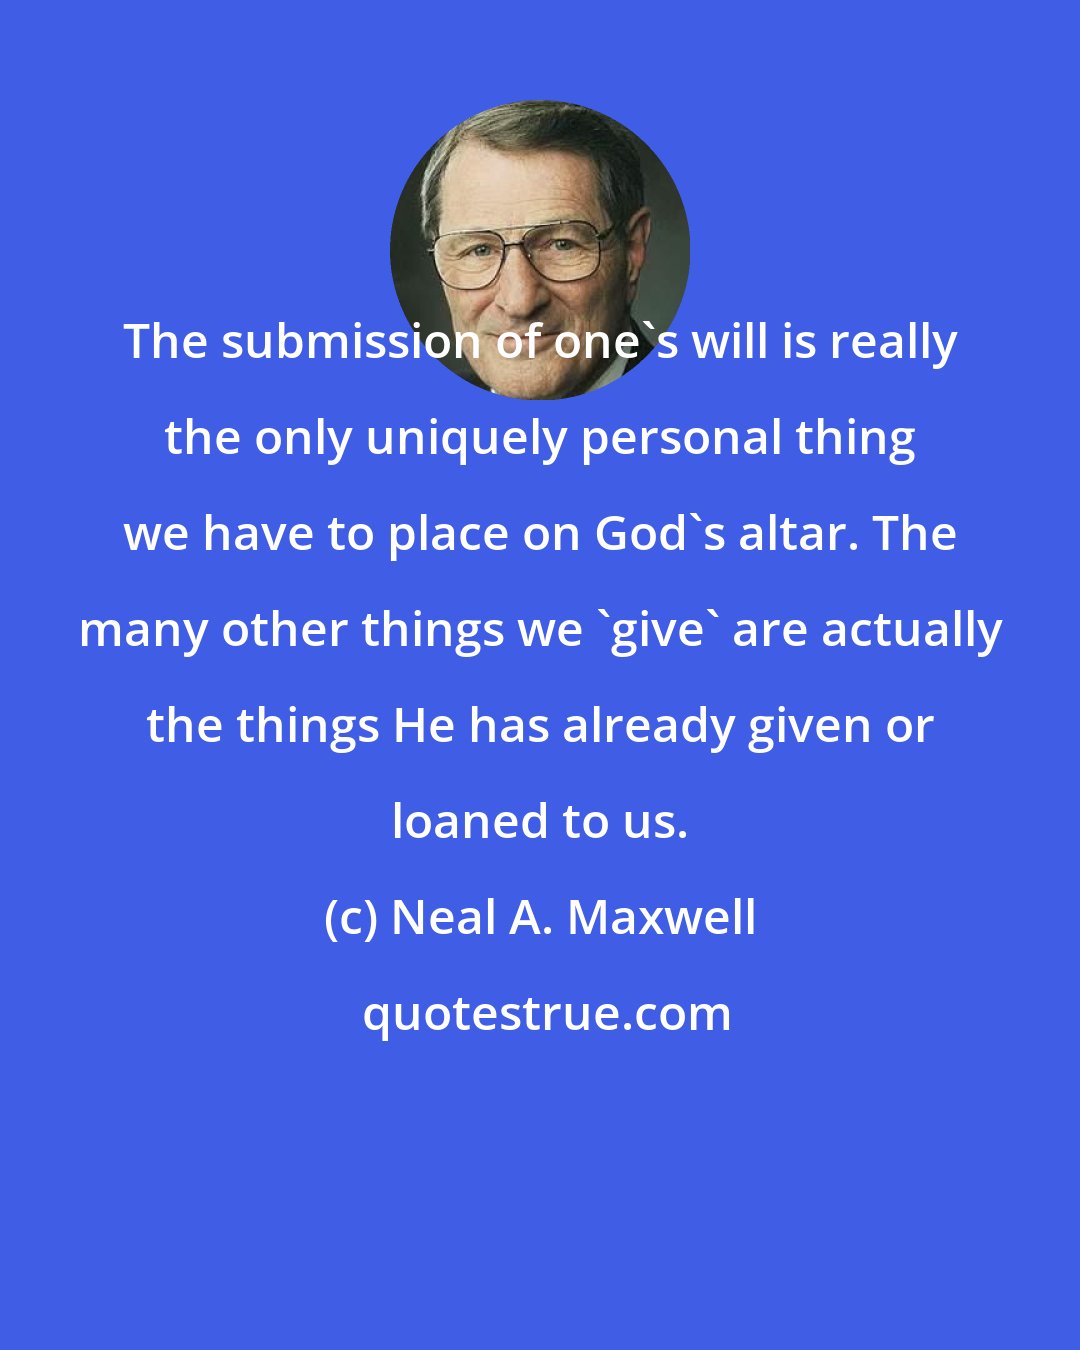 Neal A. Maxwell: The submission of one's will is really the only uniquely personal thing we have to place on God's altar. The many other things we 'give' are actually the things He has already given or loaned to us.